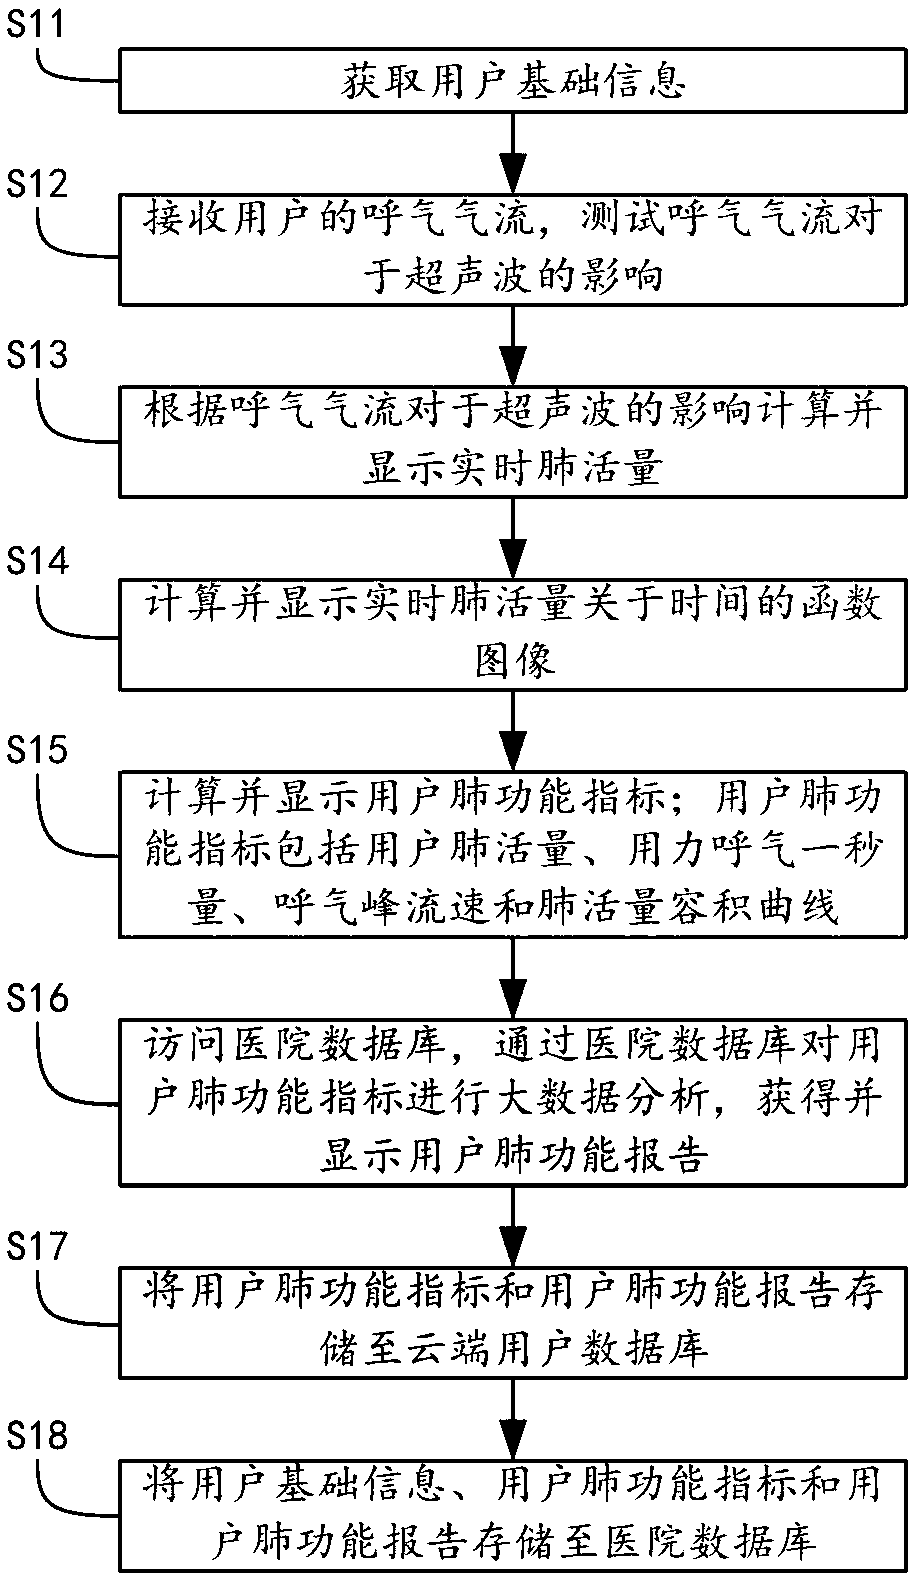 Lung function detection and data statistics method and system